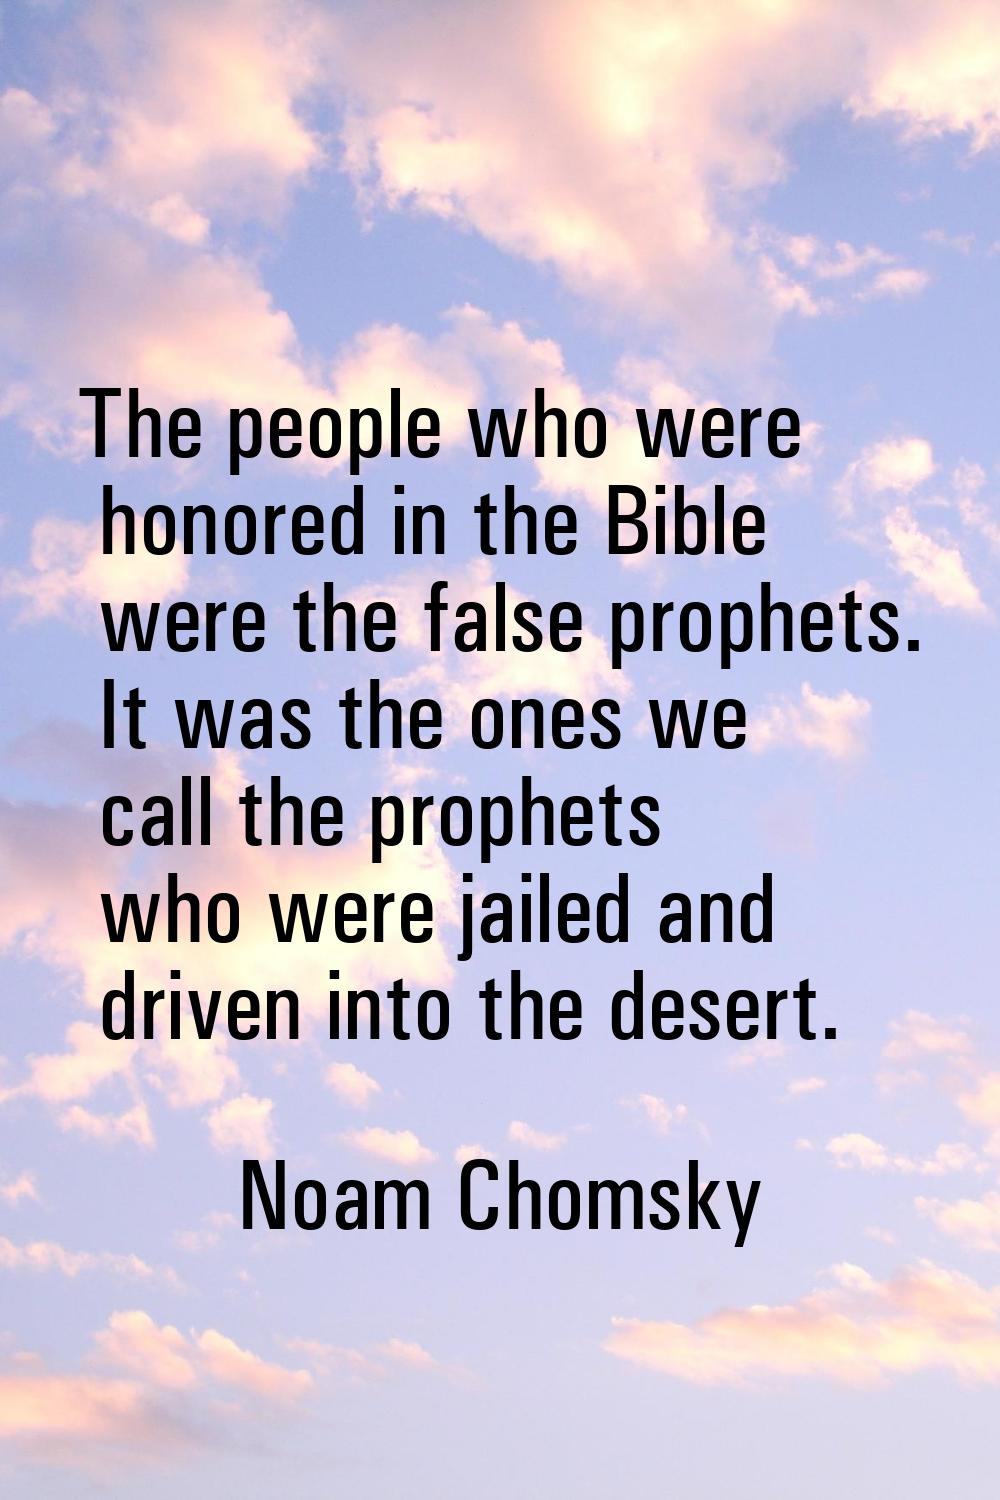 The people who were honored in the Bible were the false prophets. It was the ones we call the proph